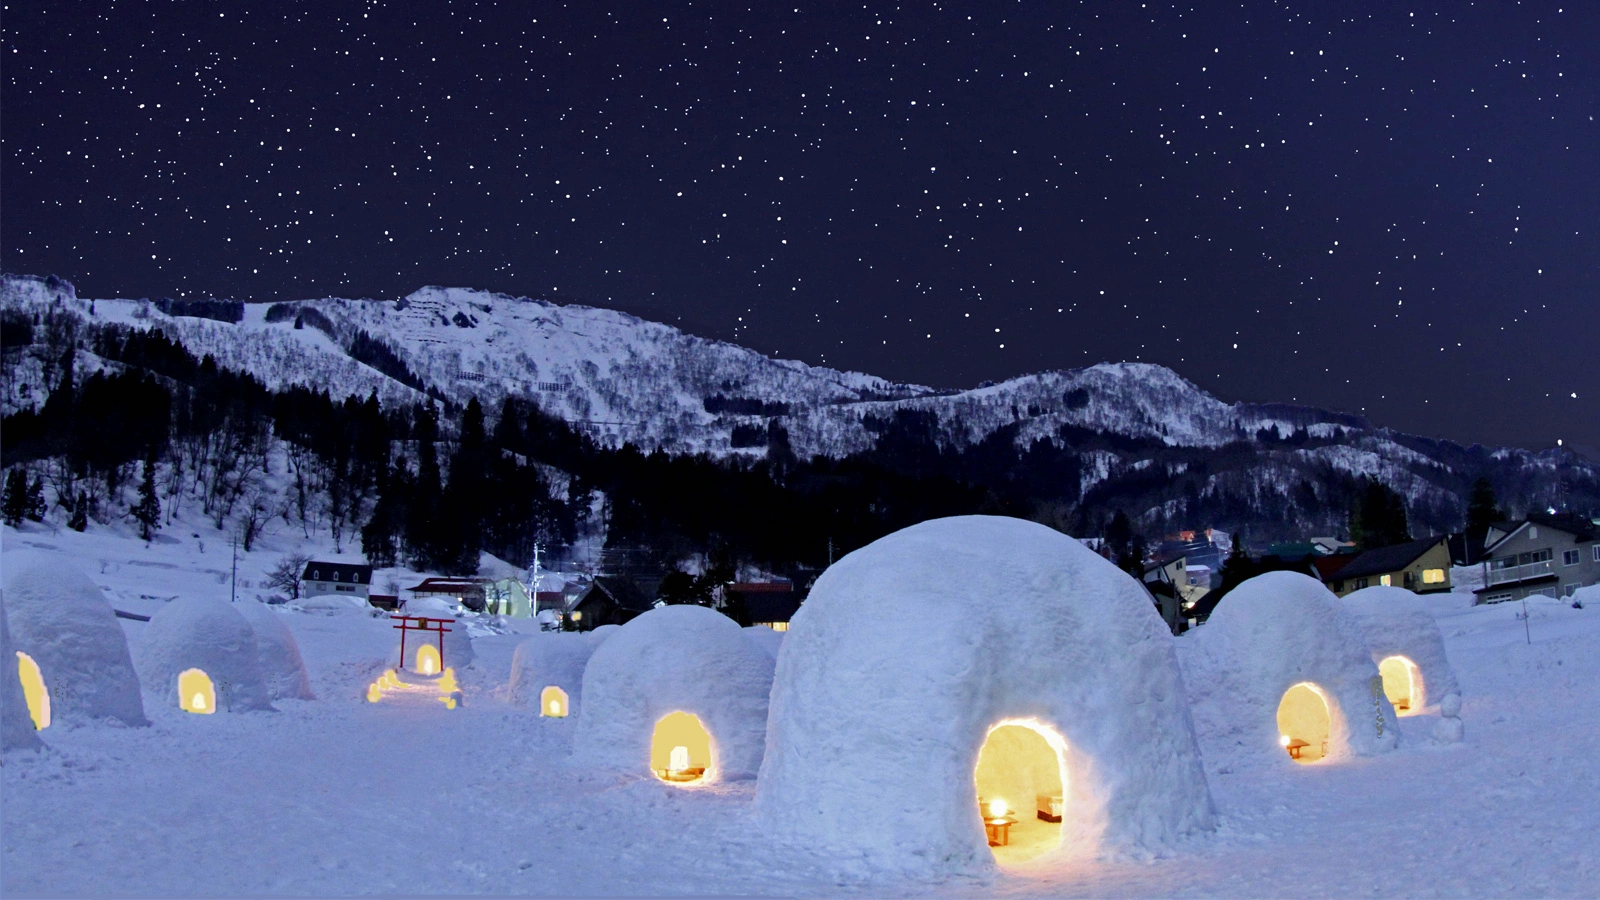 Igloos in snowy village at night